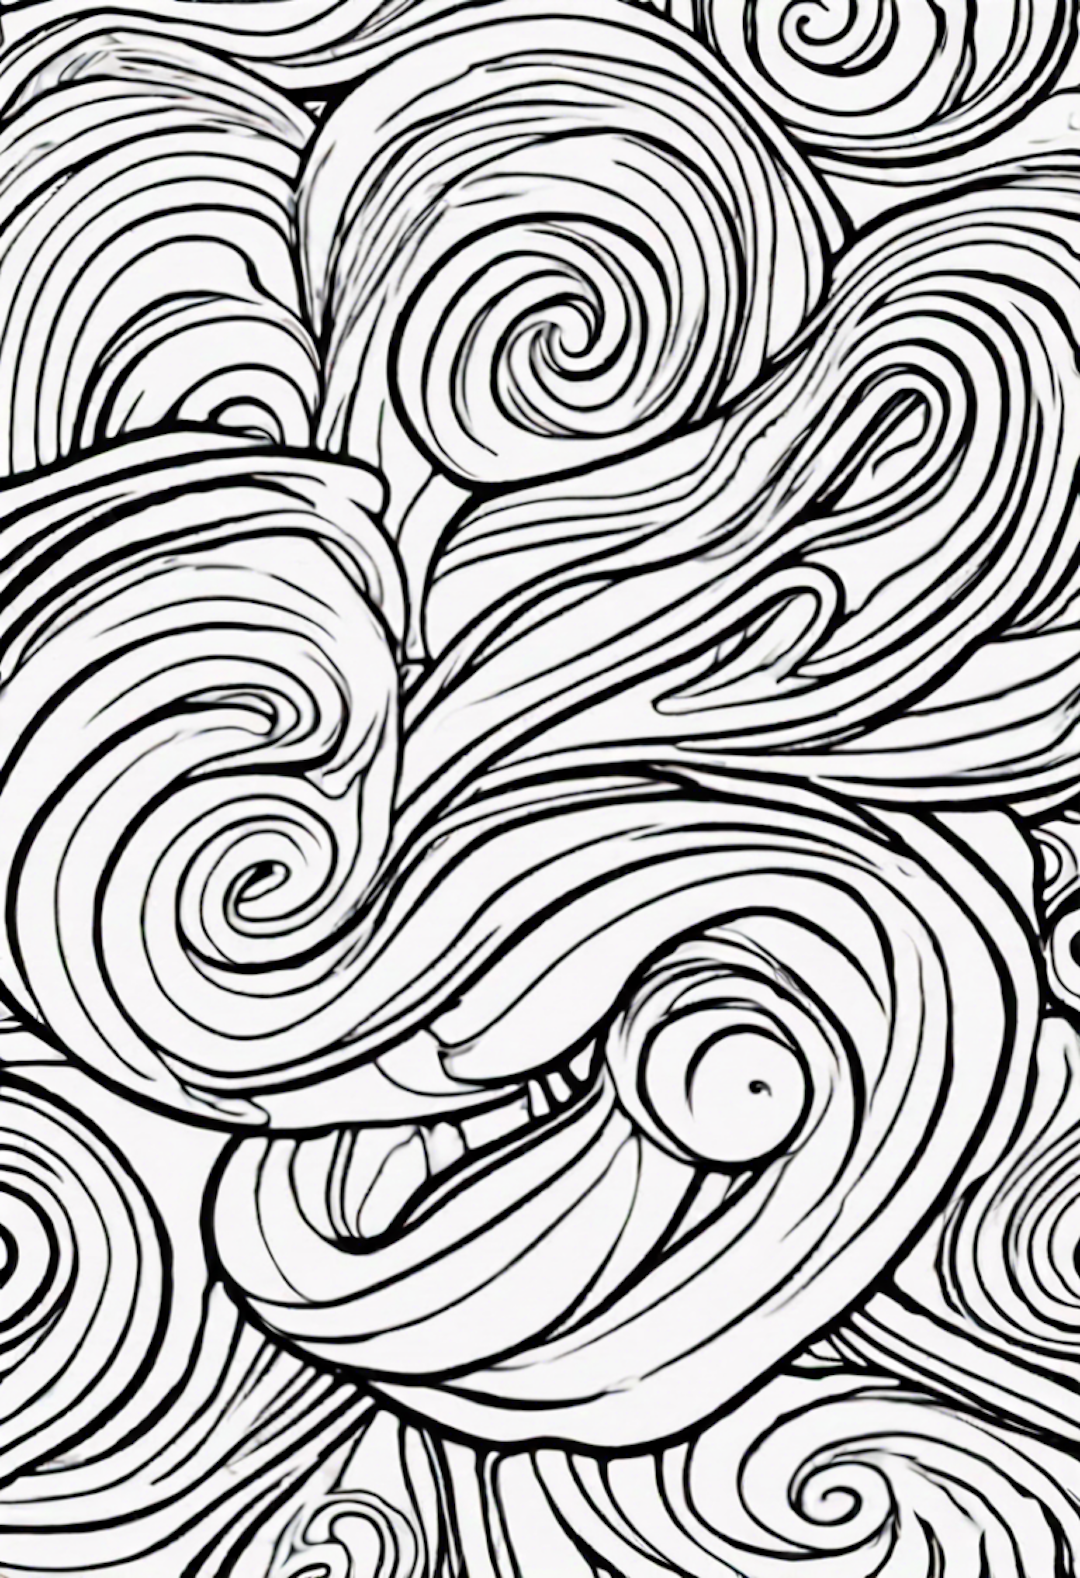 Swirling Waves Coloring Page coloring pages